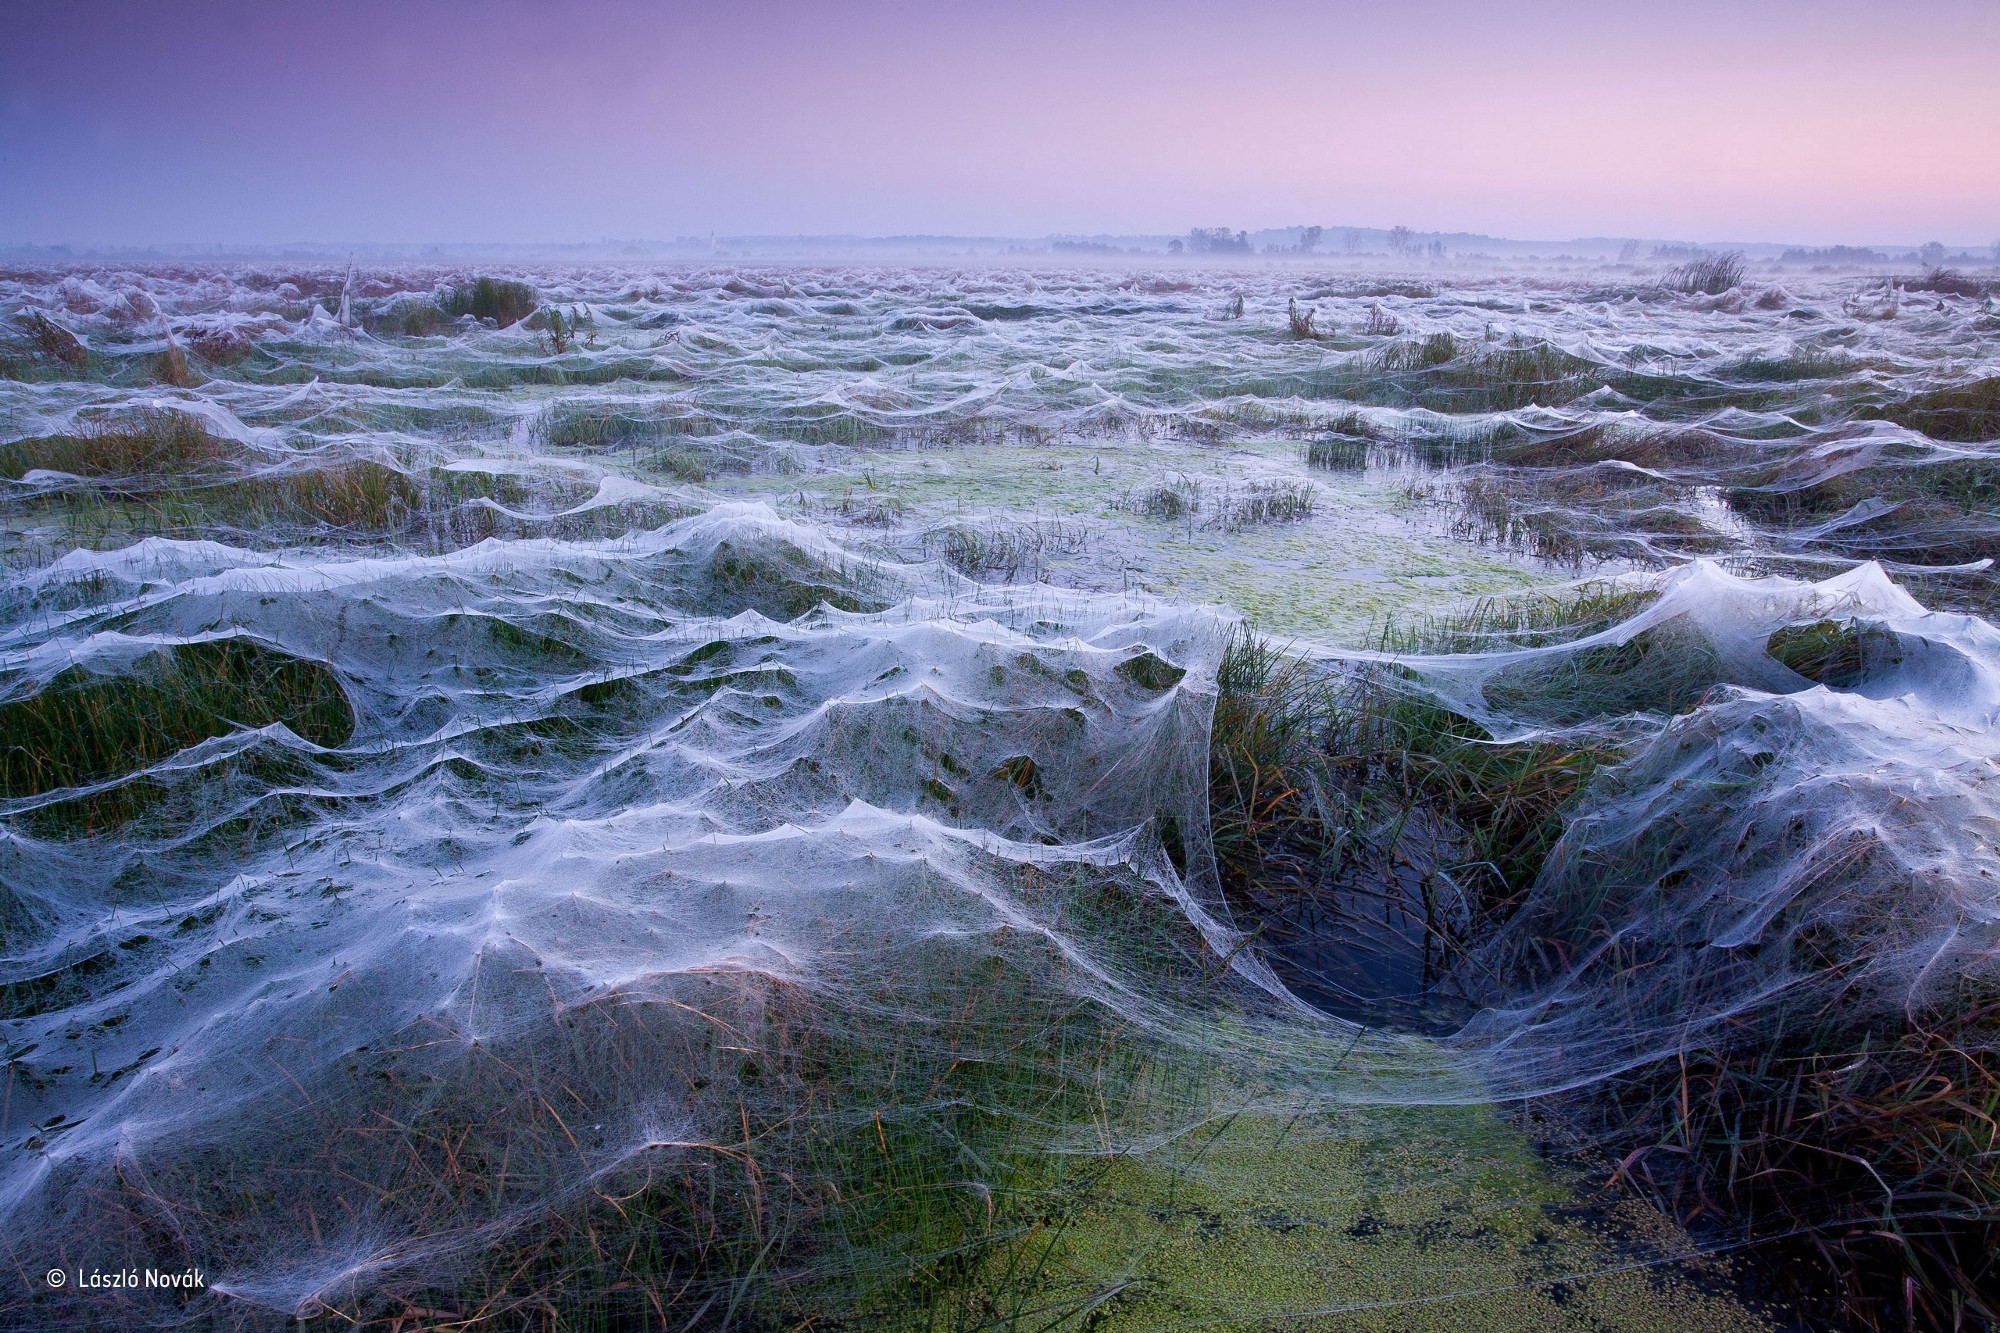 General 2000x1333 nature landscape clear sky Hungary spiderwebs field water swamp plants winner contests photography trees mist watermarked